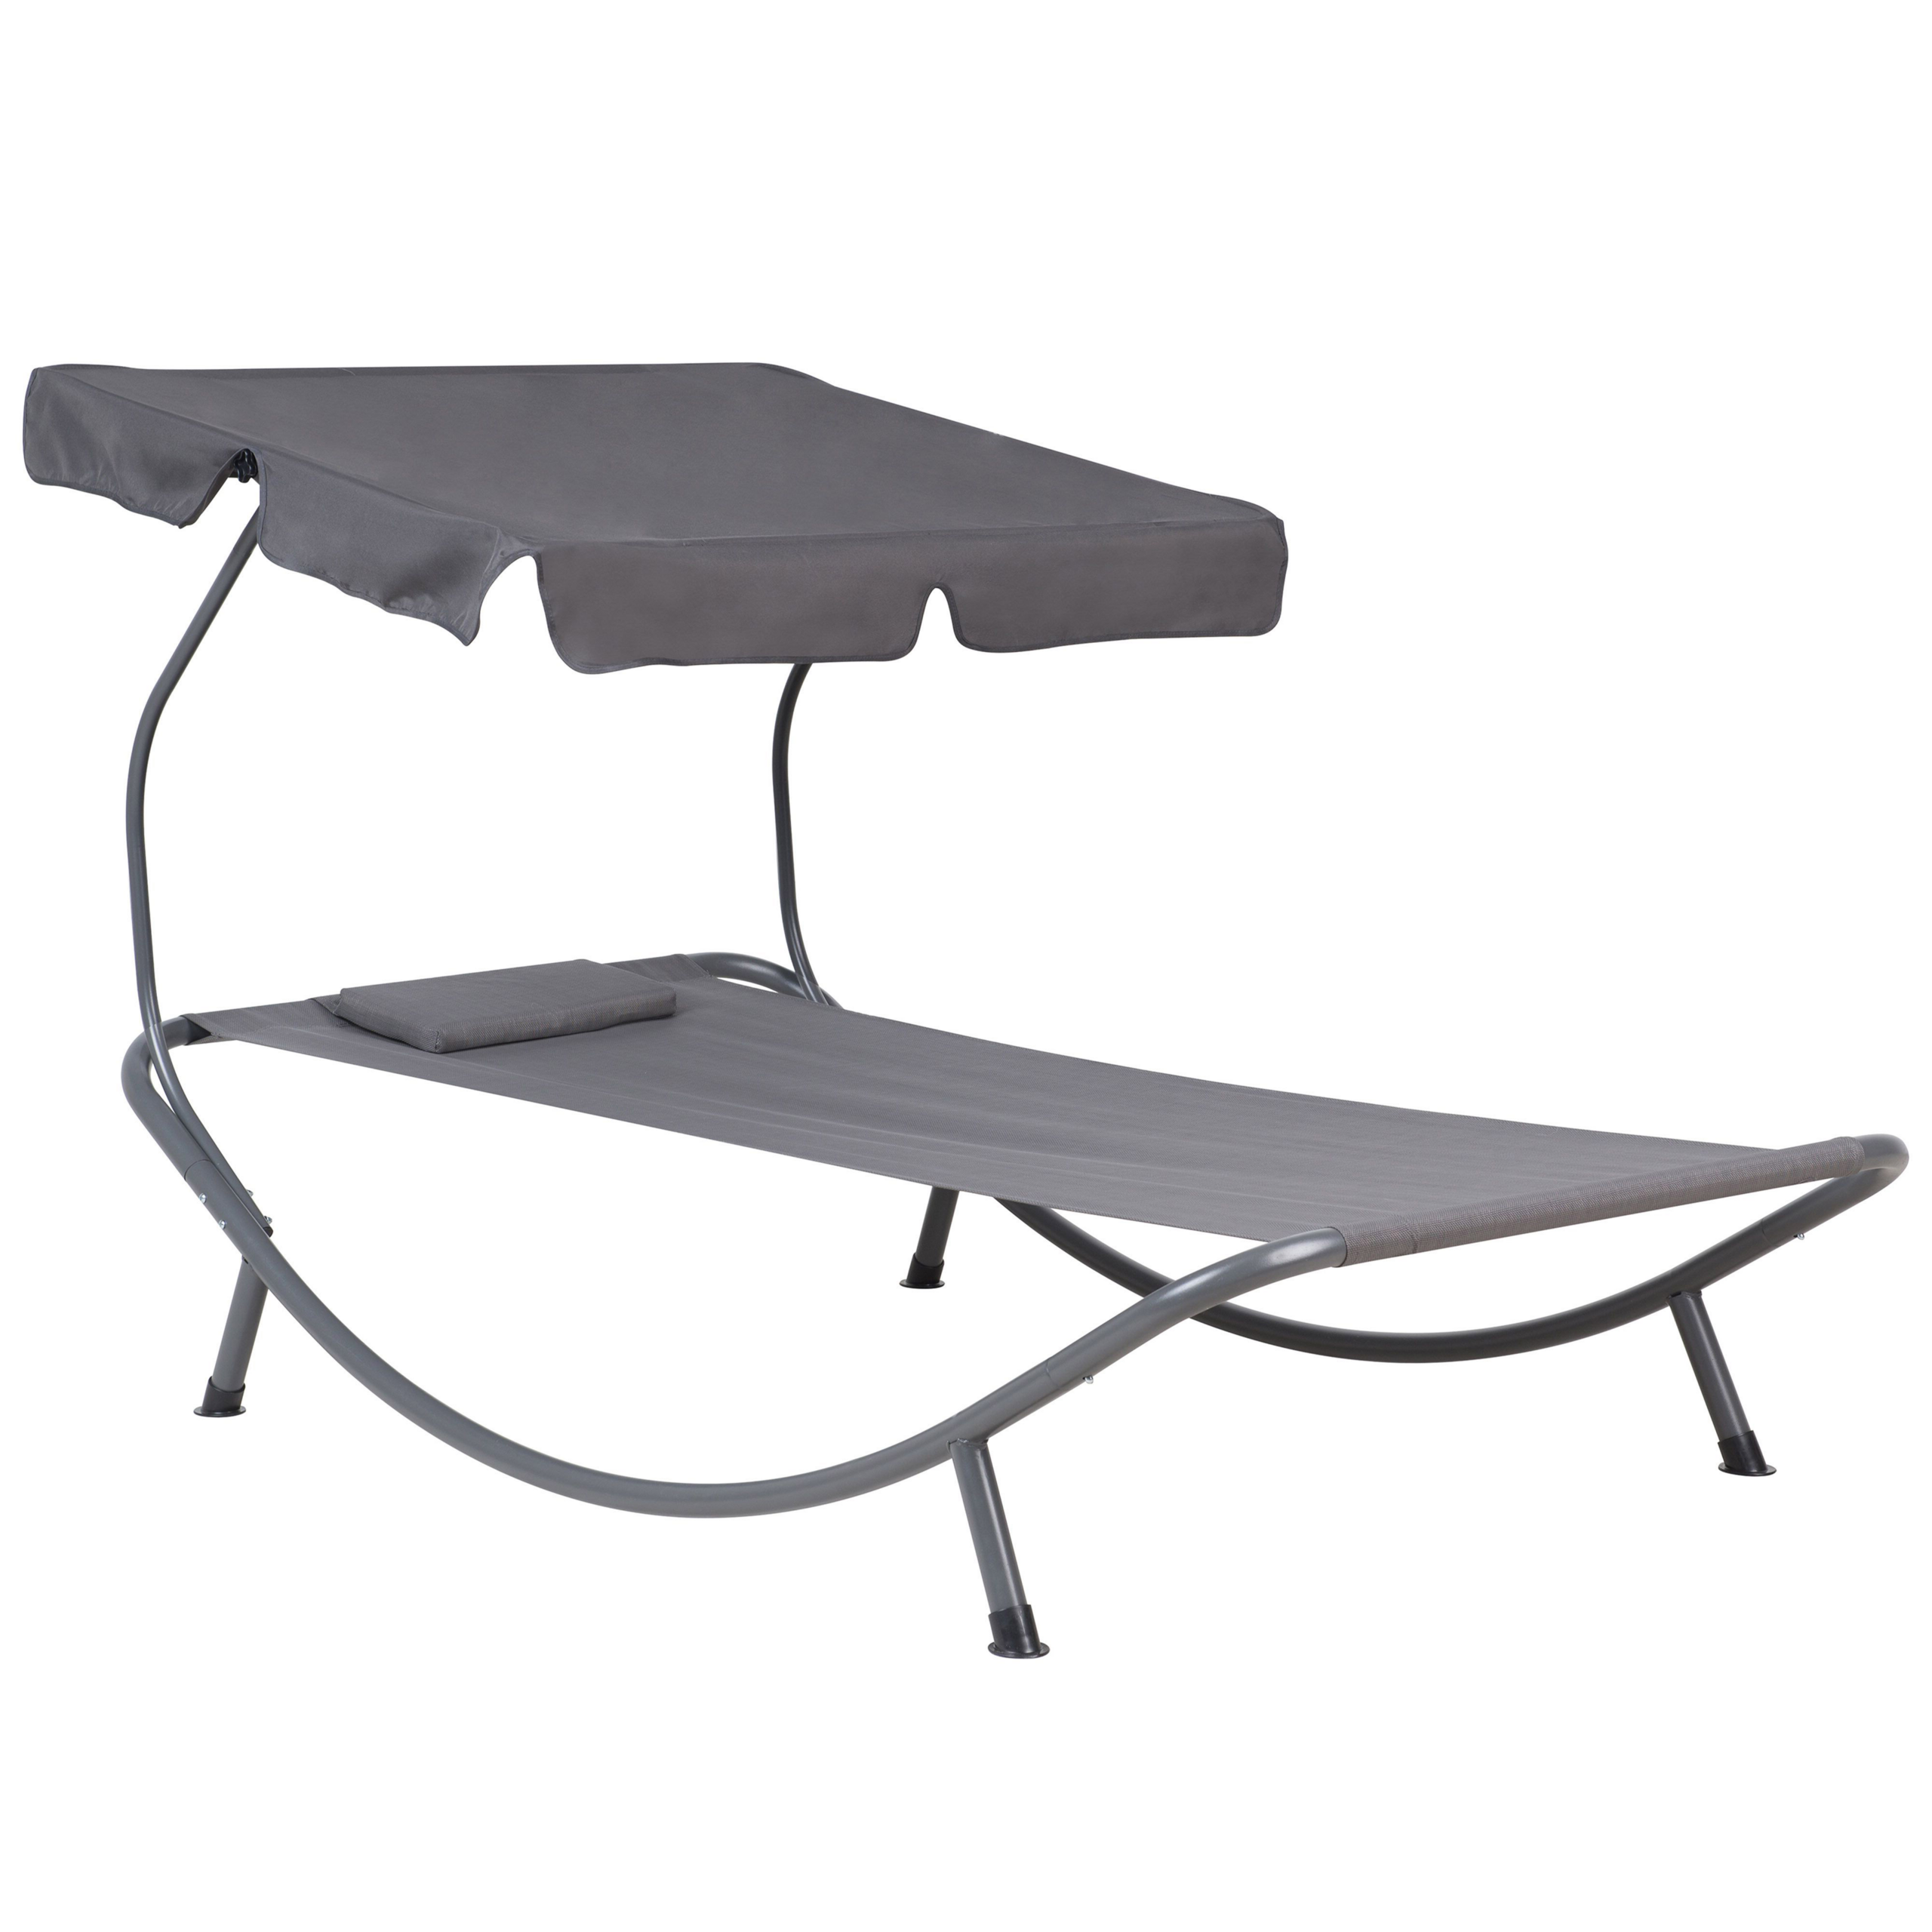 Beliani Garden Outdoor Lounger Daybed Dark Grey Textile Seat Aluminium Frame Curved Canopy Material:Steel Size:200x110x110